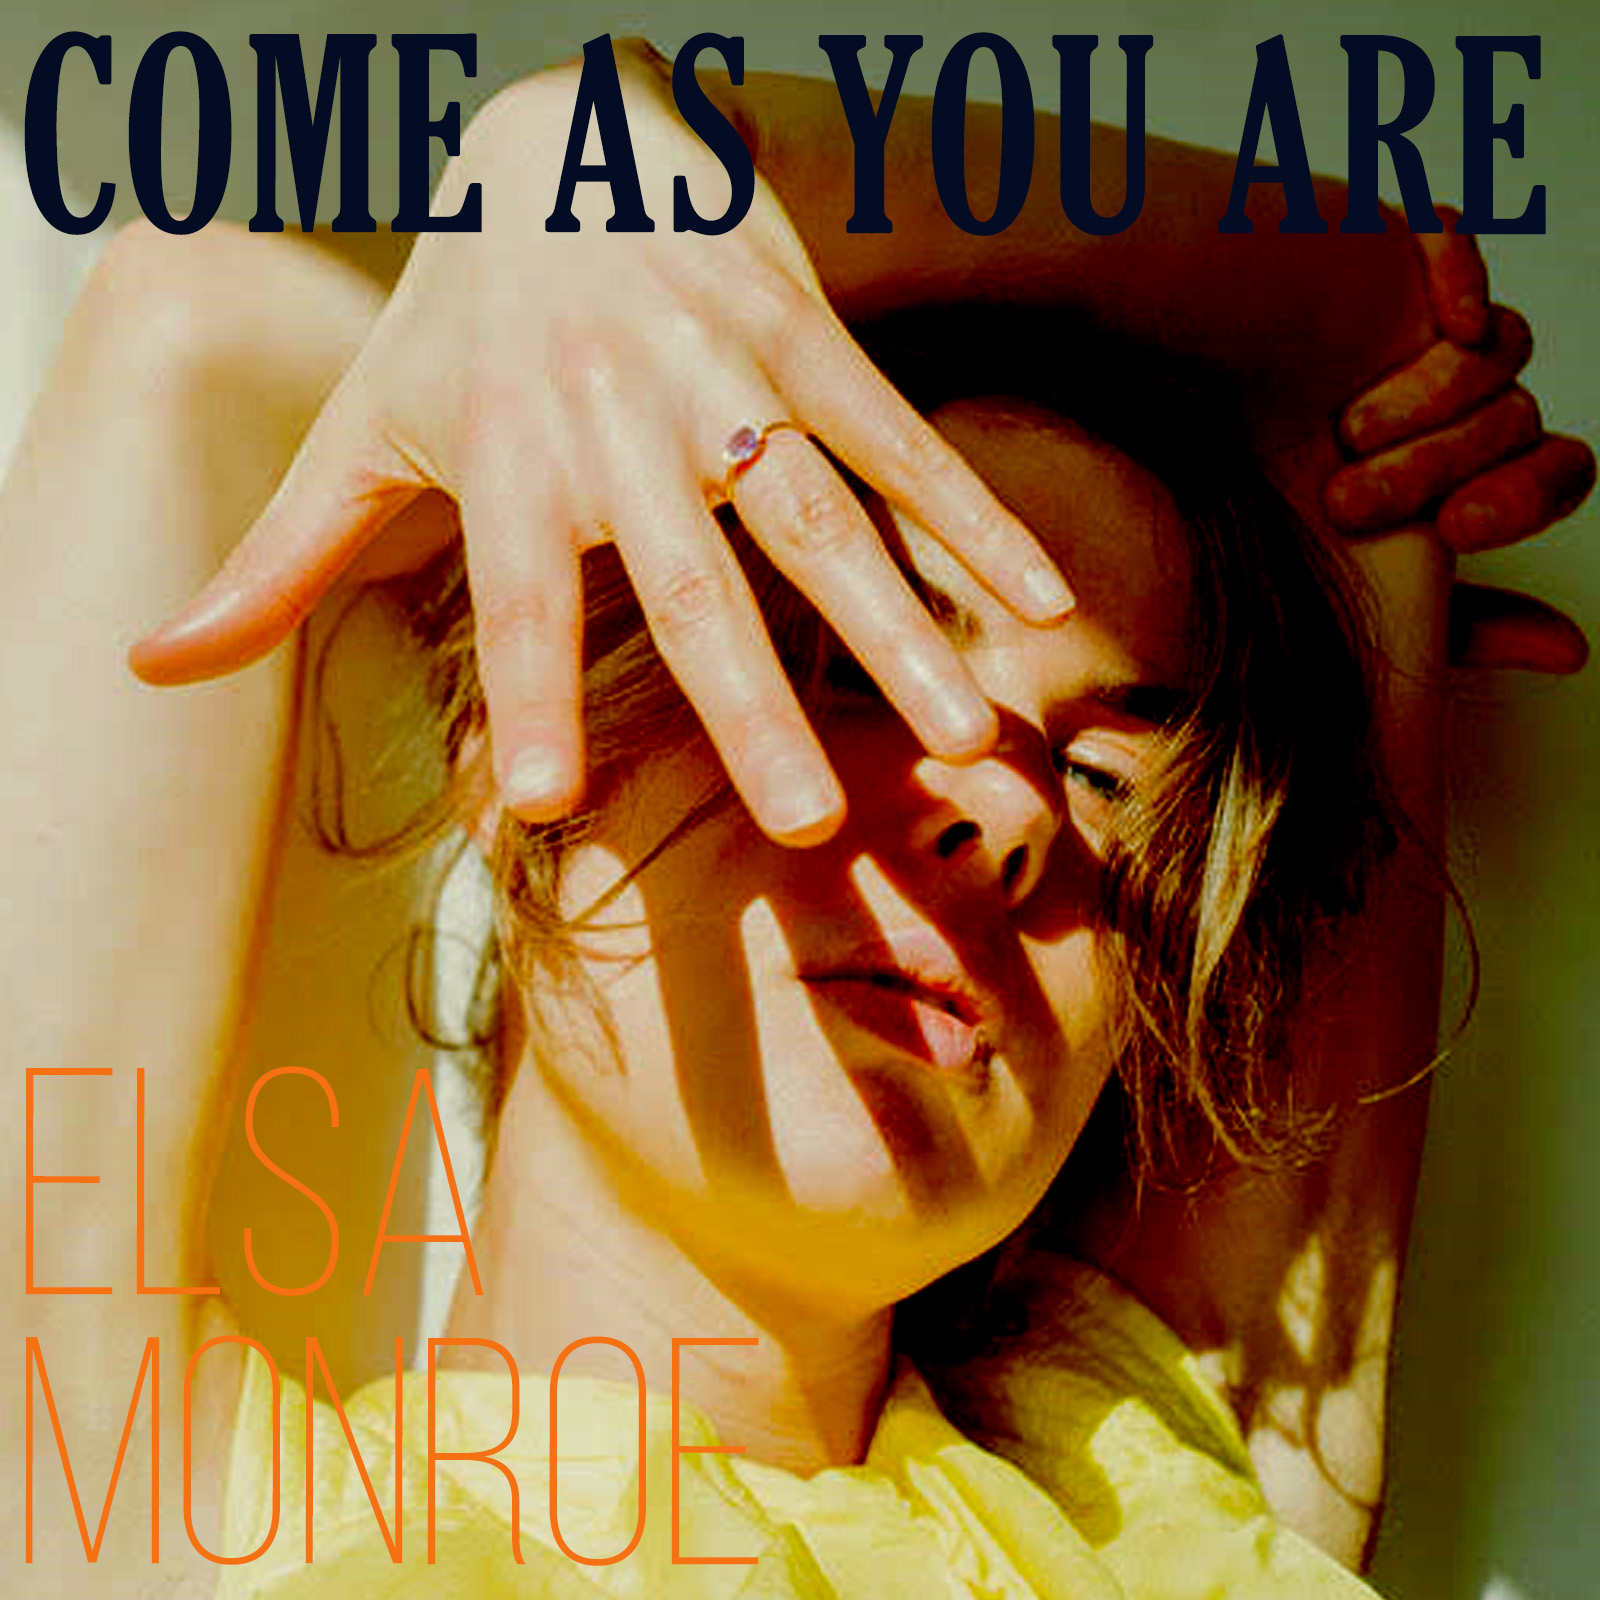 Come As You Are - Cover by Elsa Monroe